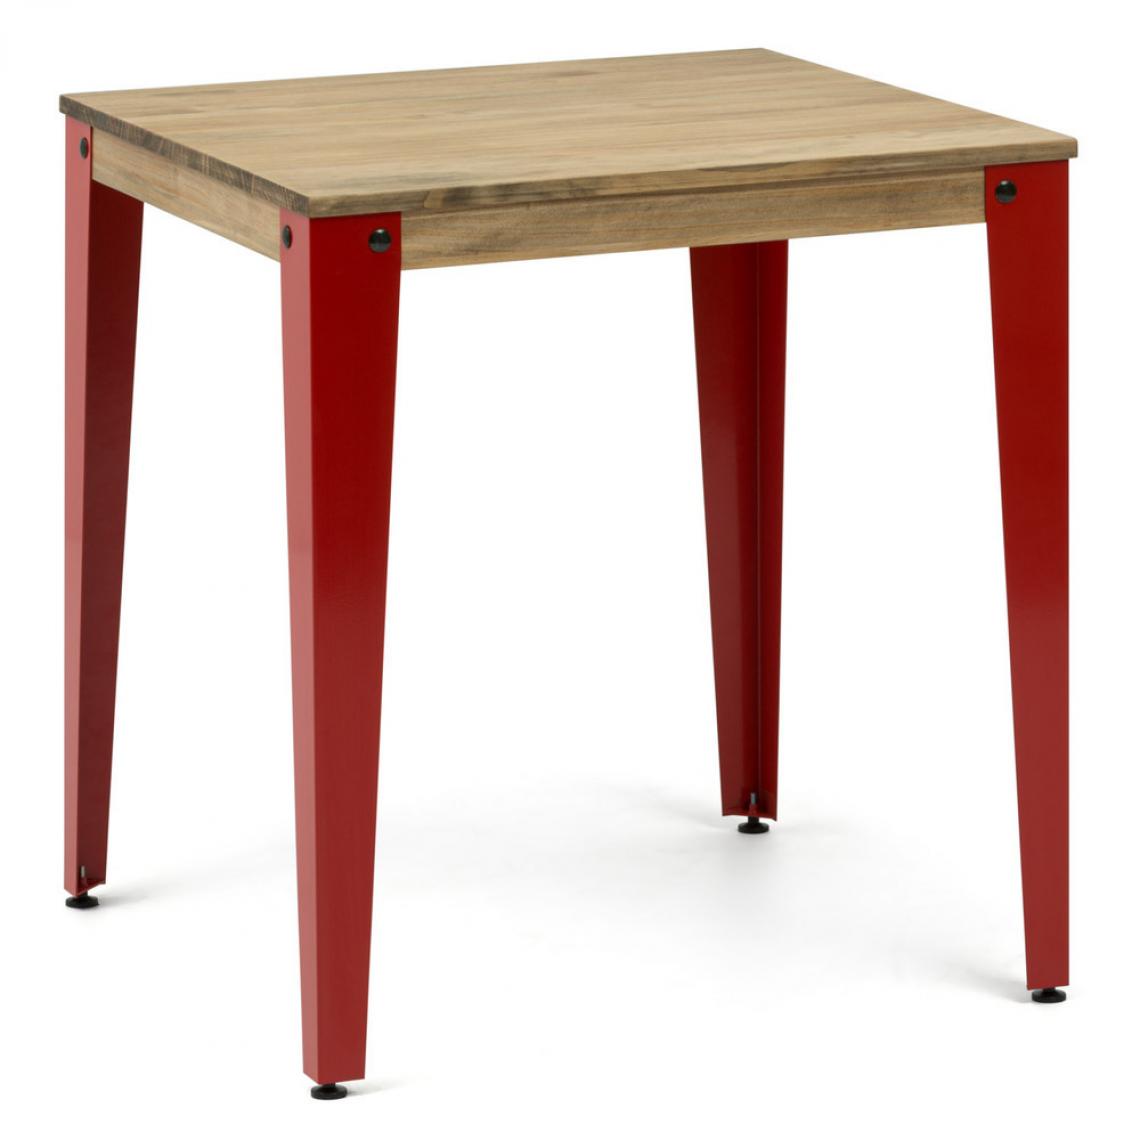 BOX FURNITURE - Table Salle à Manger Lunds 80x80x75cm Rouge-Vieilli Box Furniture - Tables à manger